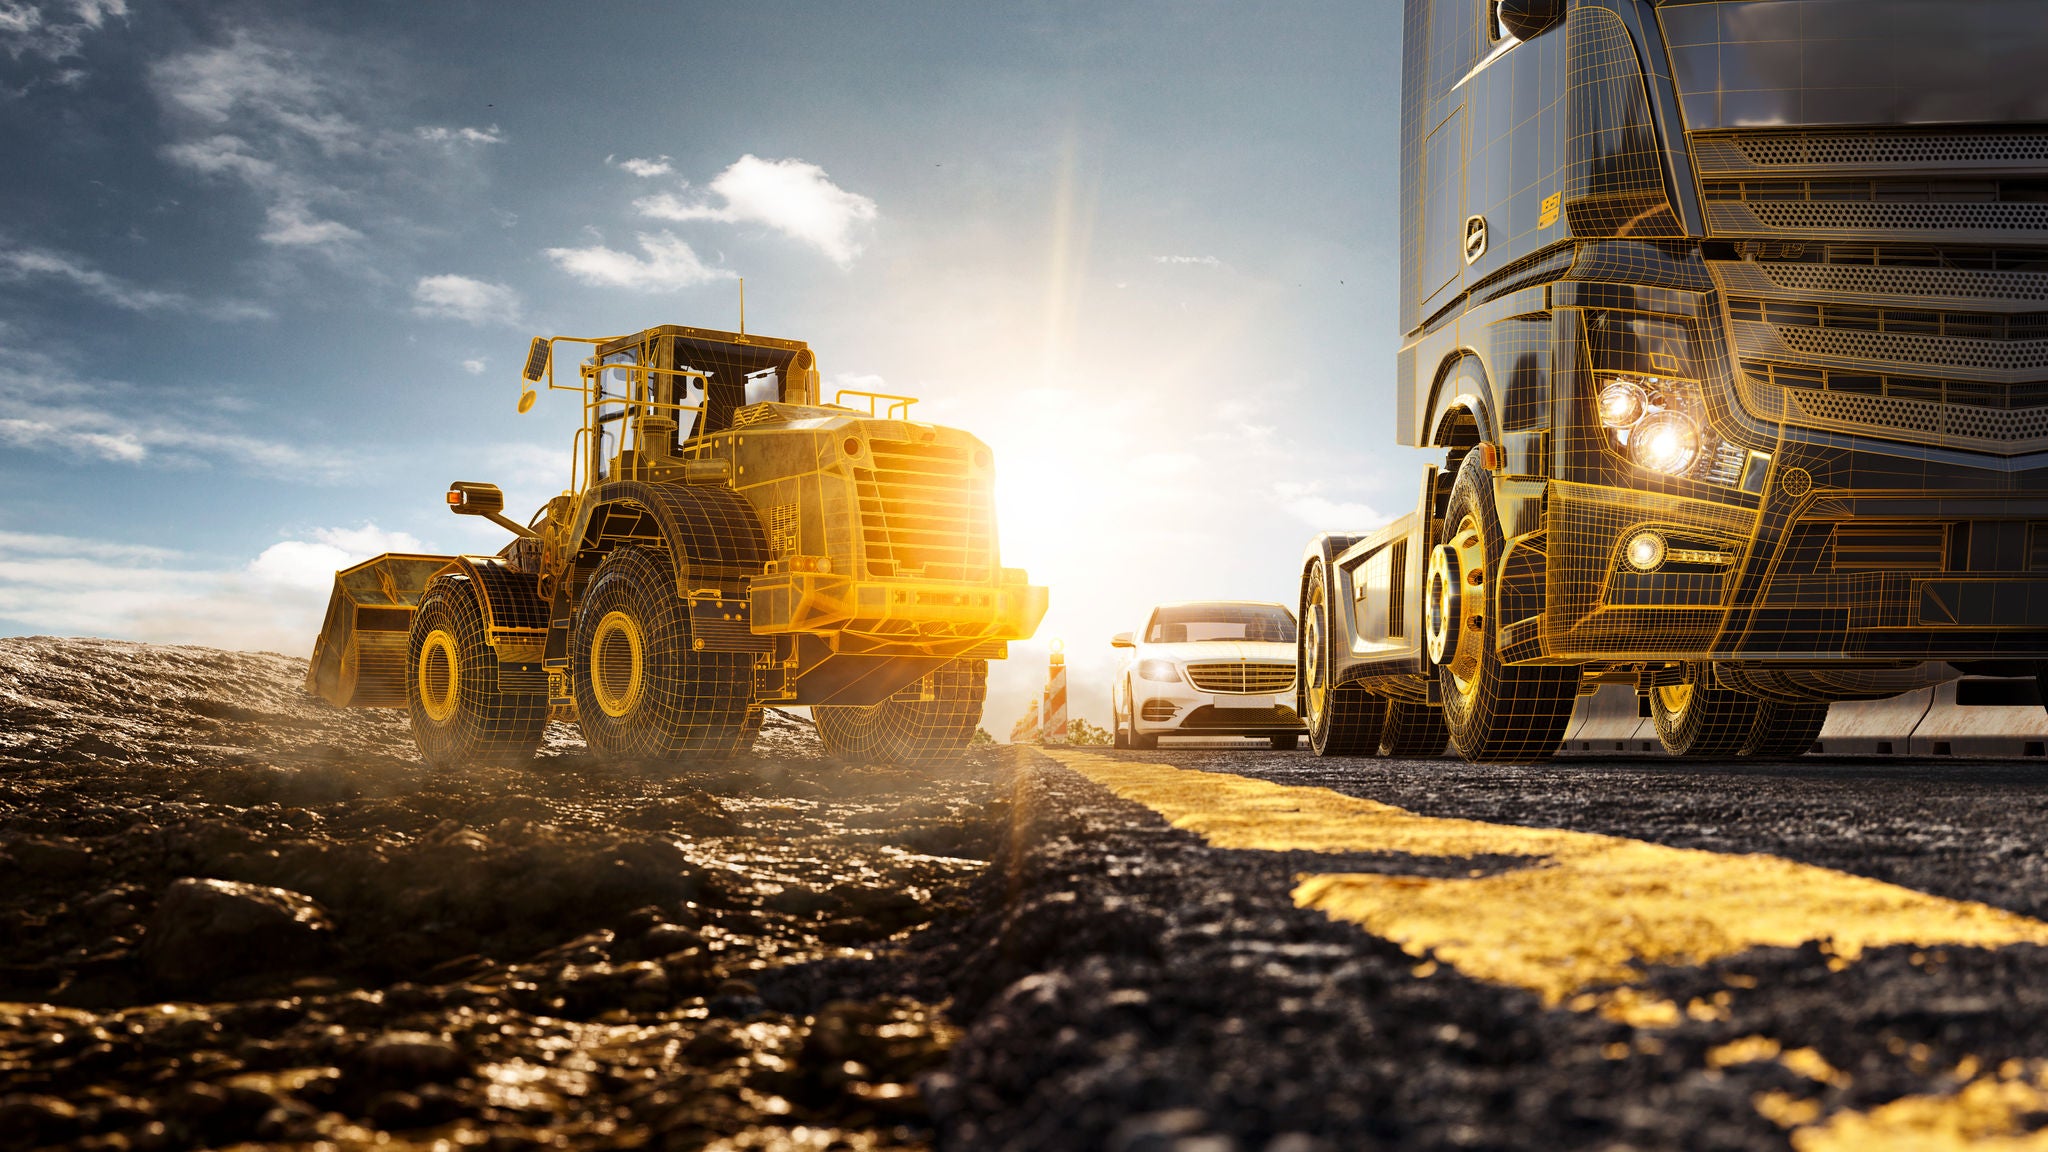 Continental Tires | Discover Tires Online